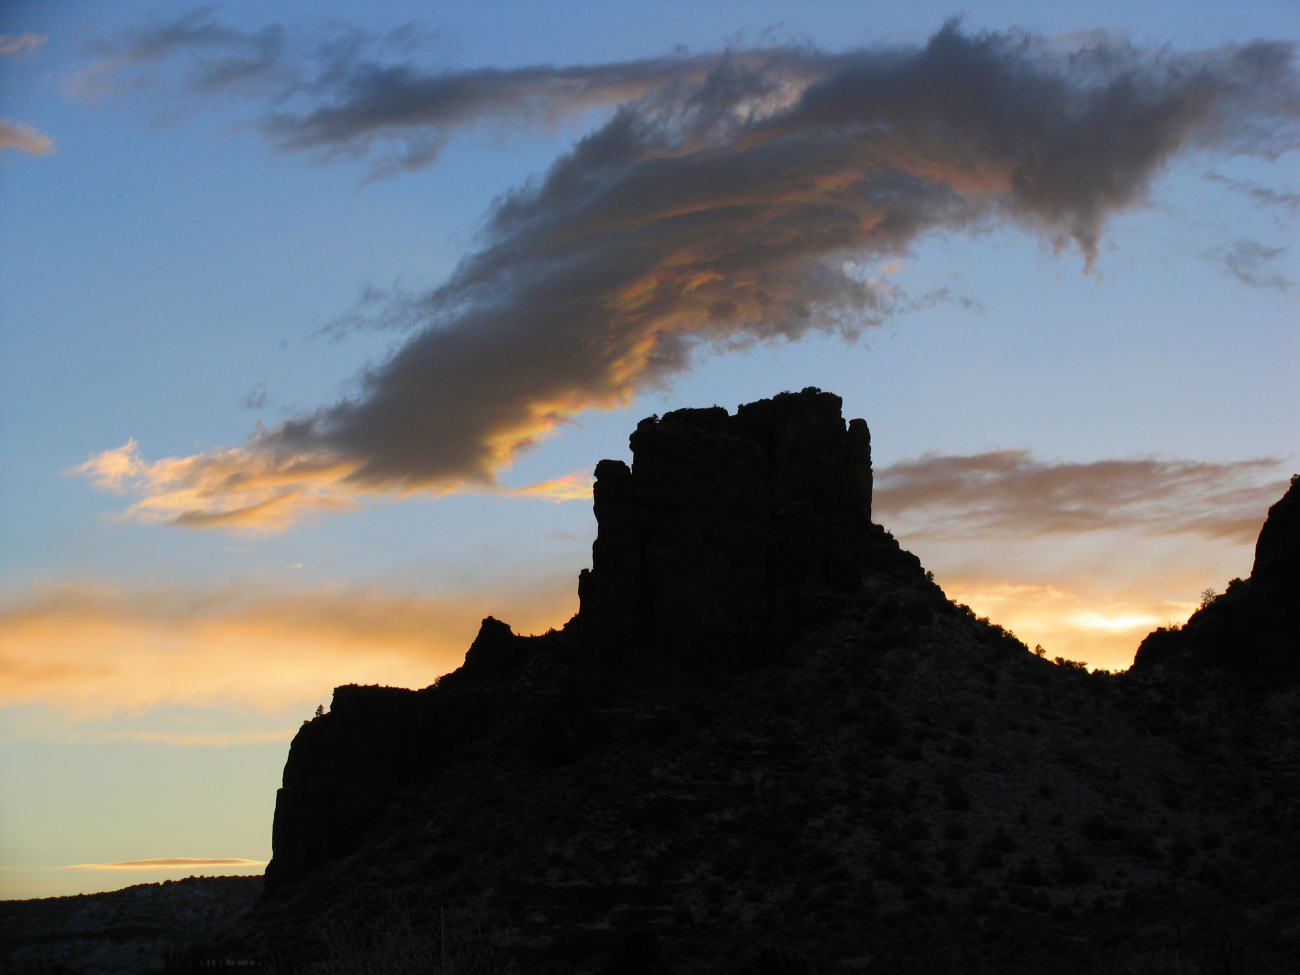 A castle-like rock structure silhouetted in the sunset